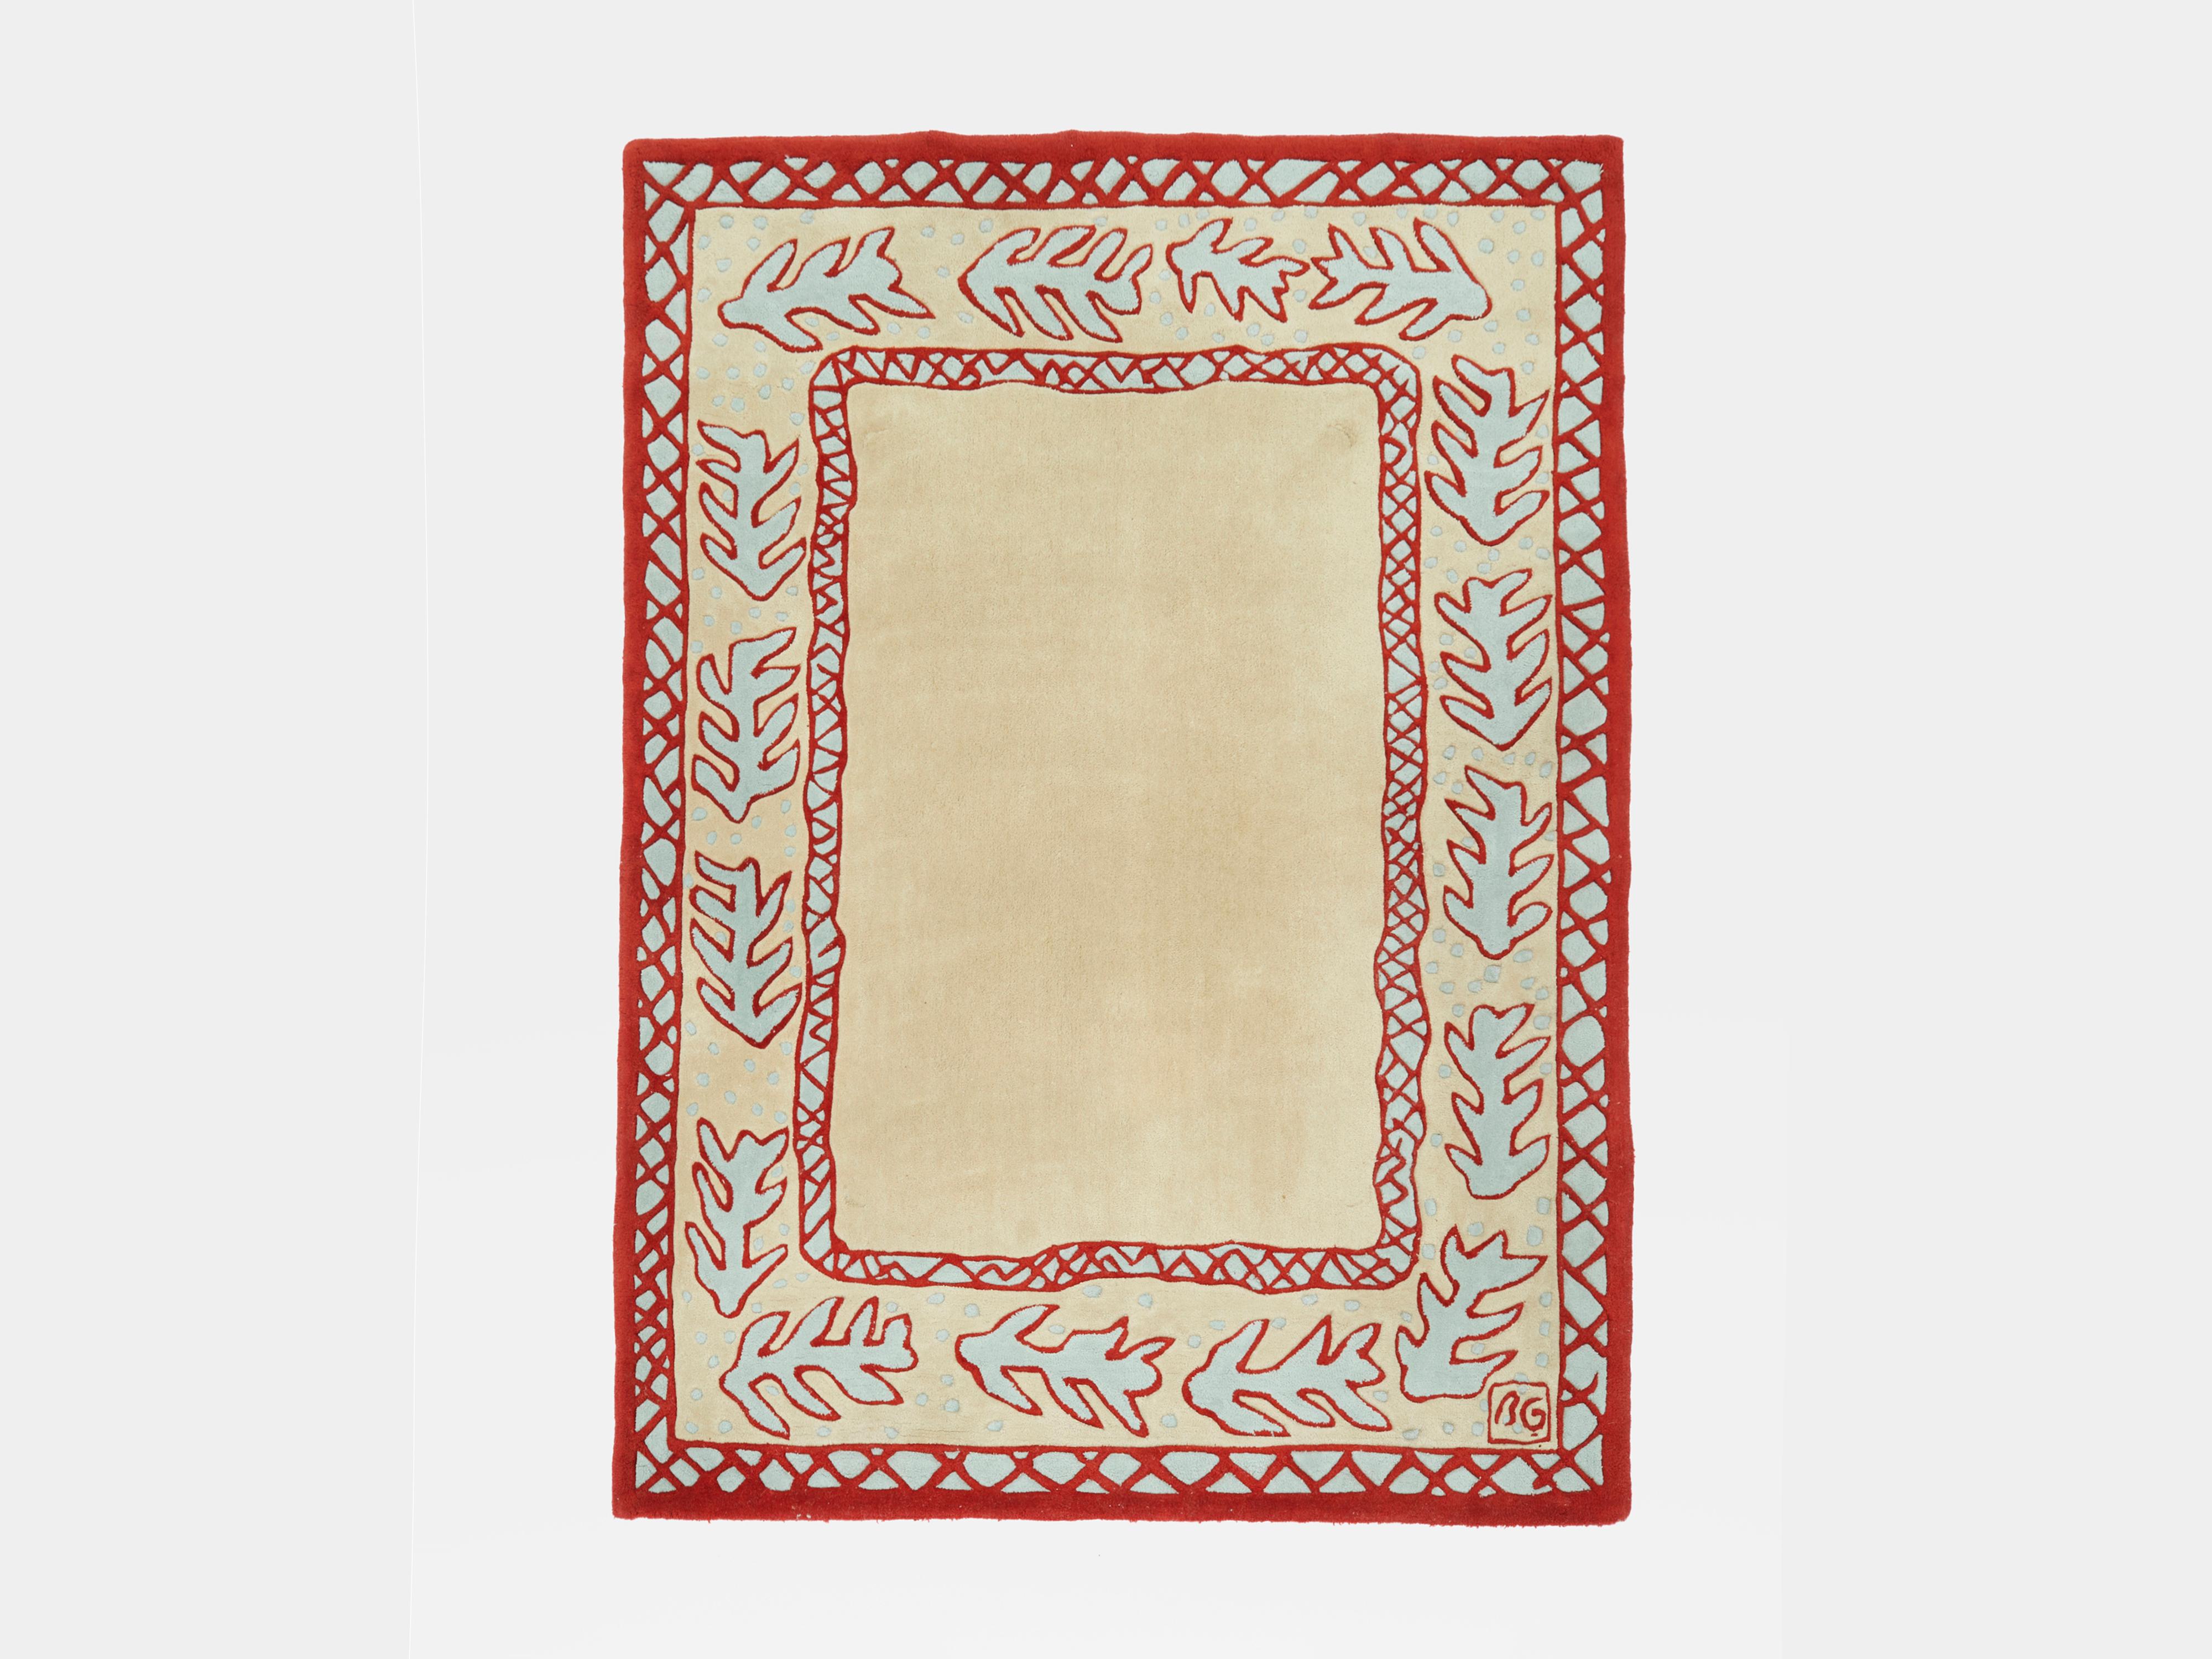 Rêverie carpet designed and created by Elizabeth Garouste and Mattia Bonetti for Sam Laik in 1993. Made of thick tufted wool, his beautiful piece features a very poetic red and light green pattern, and is signed BG and the lower right. This rug has